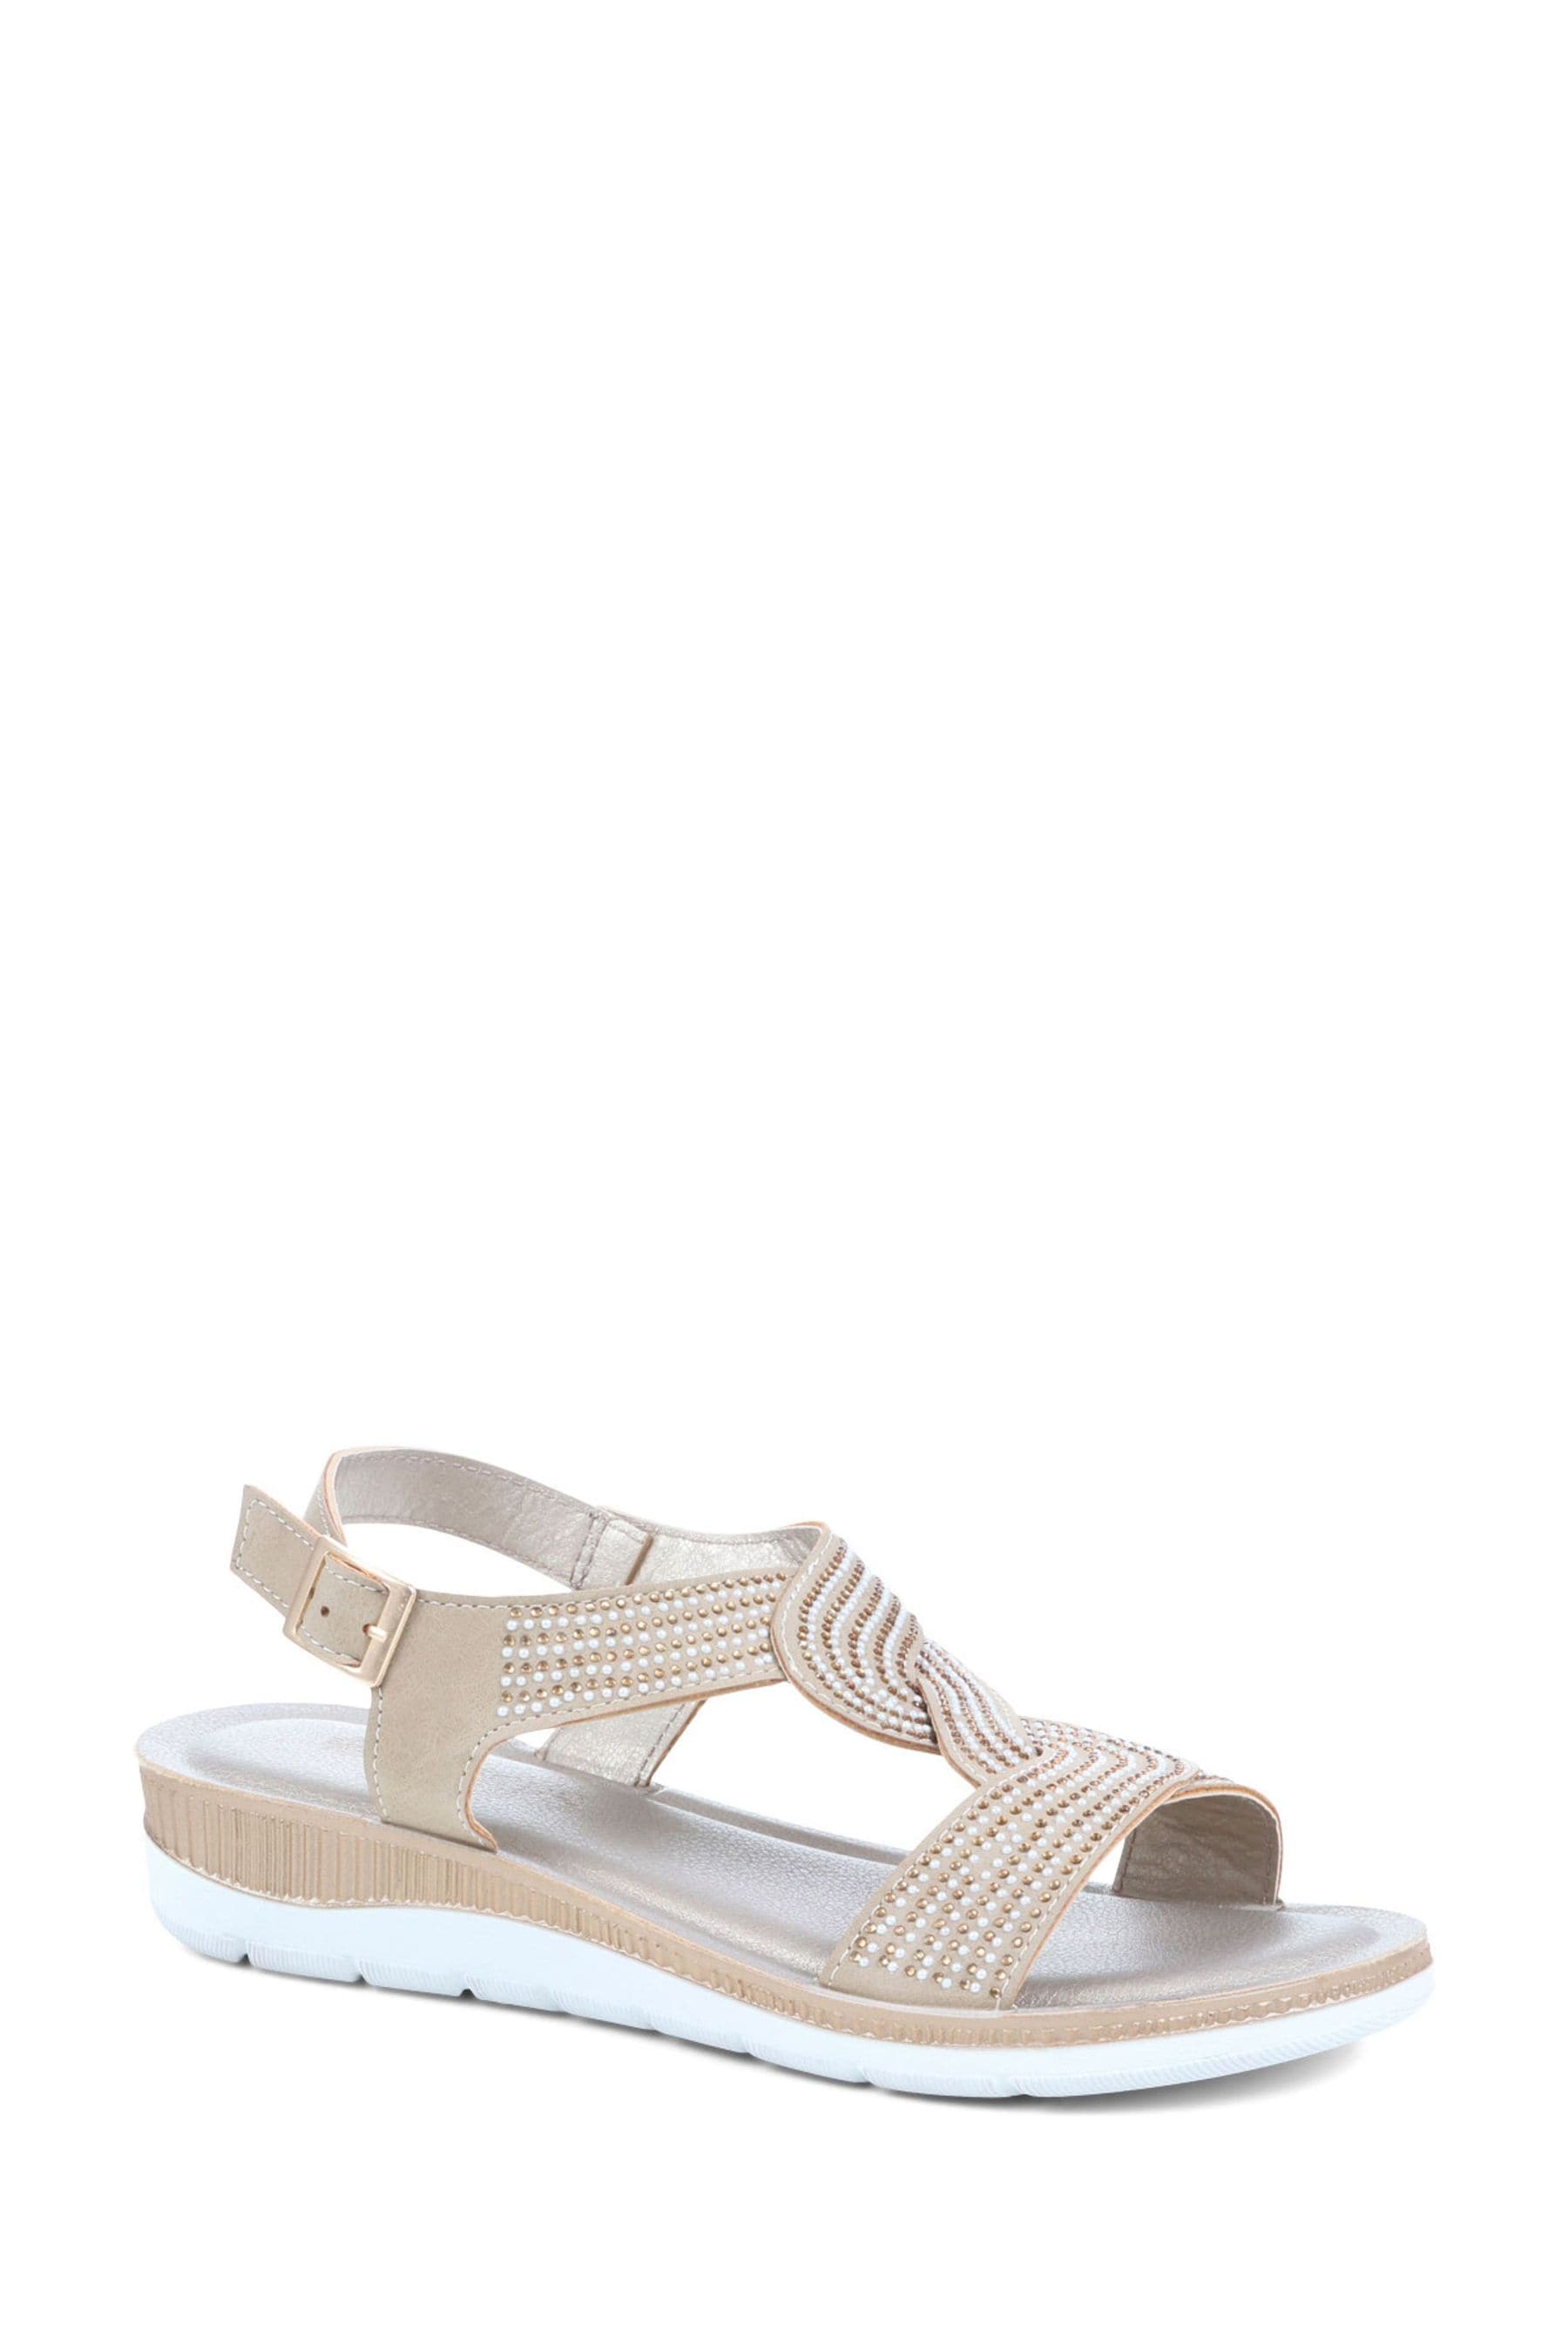 Buy Pavers Gold Woven Ankle Strap Sandals from the Next UK online shop